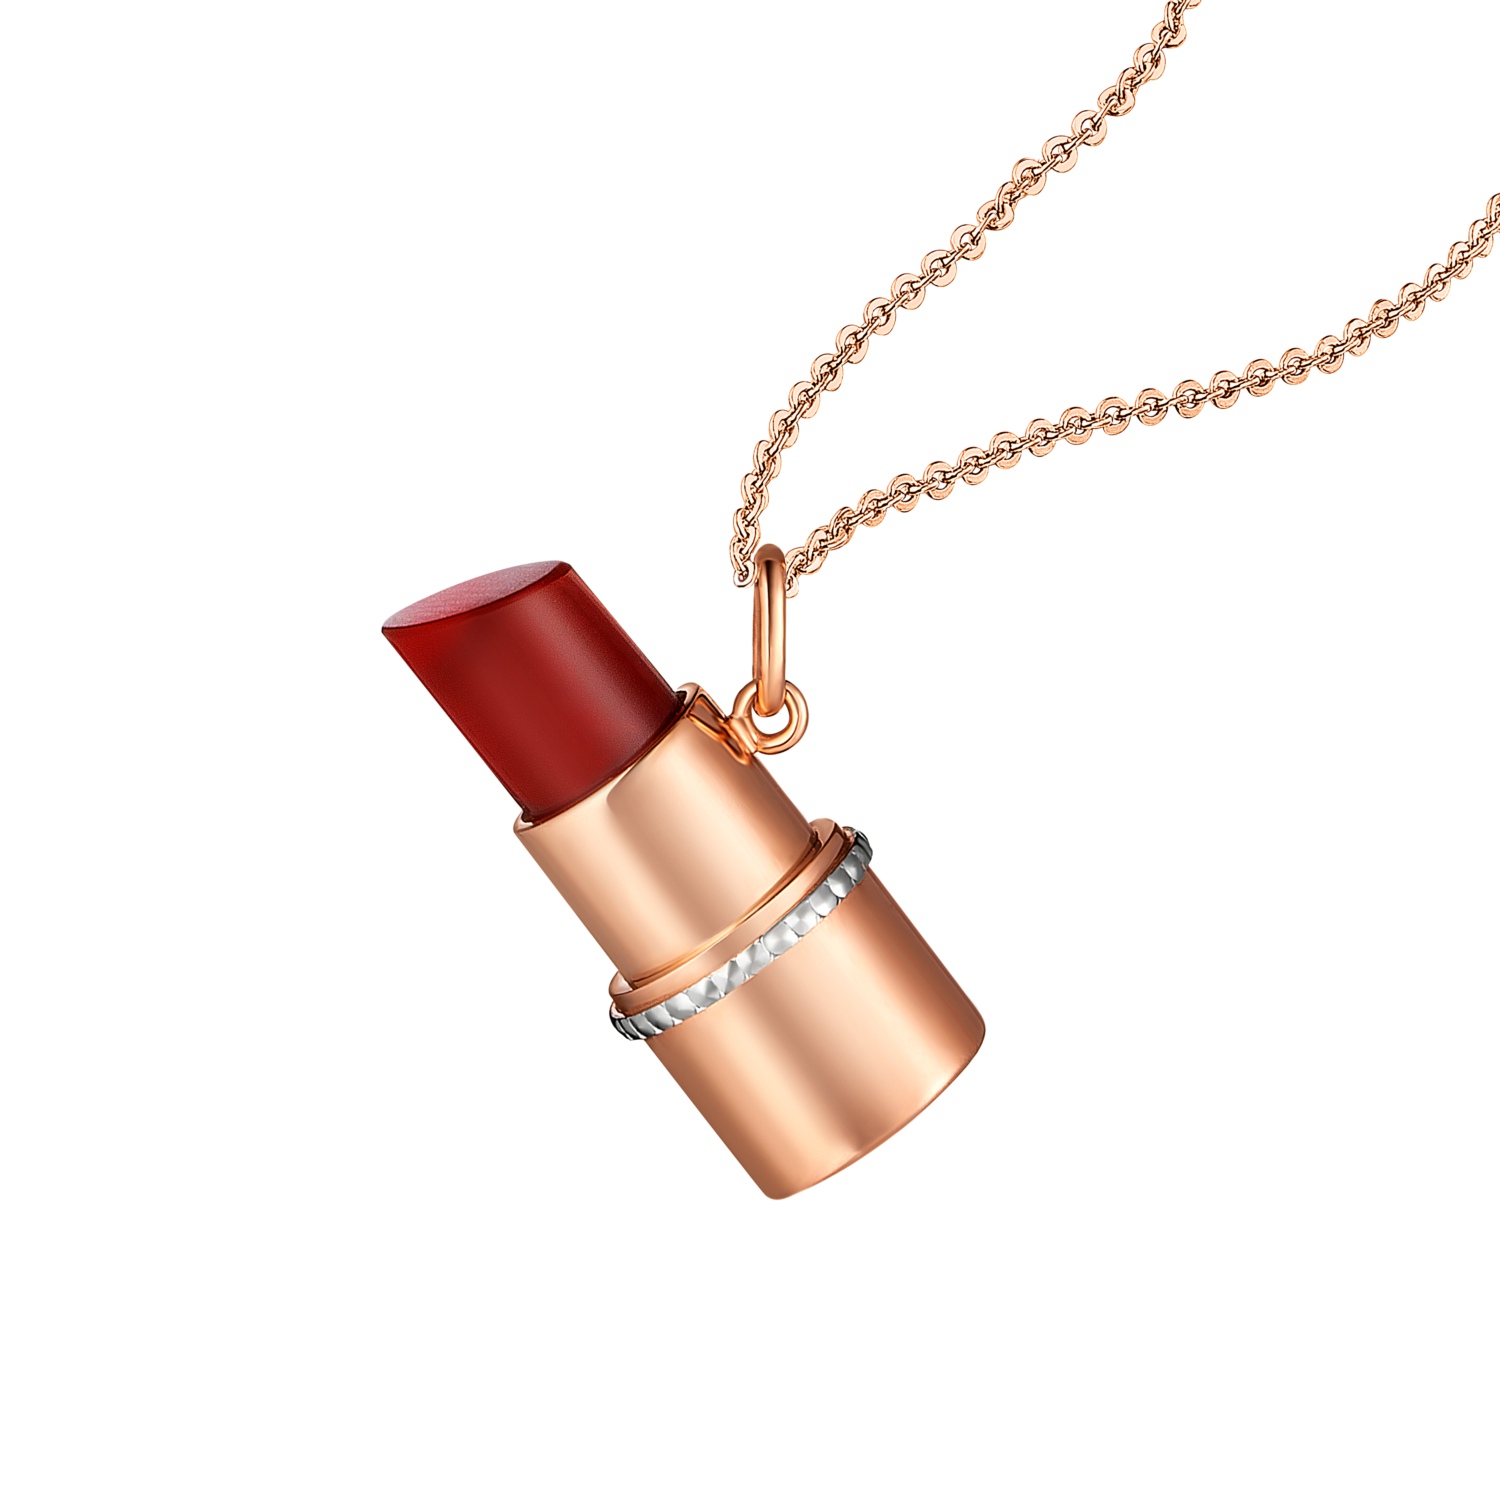 Hot items "Red lipstick" 18K Gold Necklace